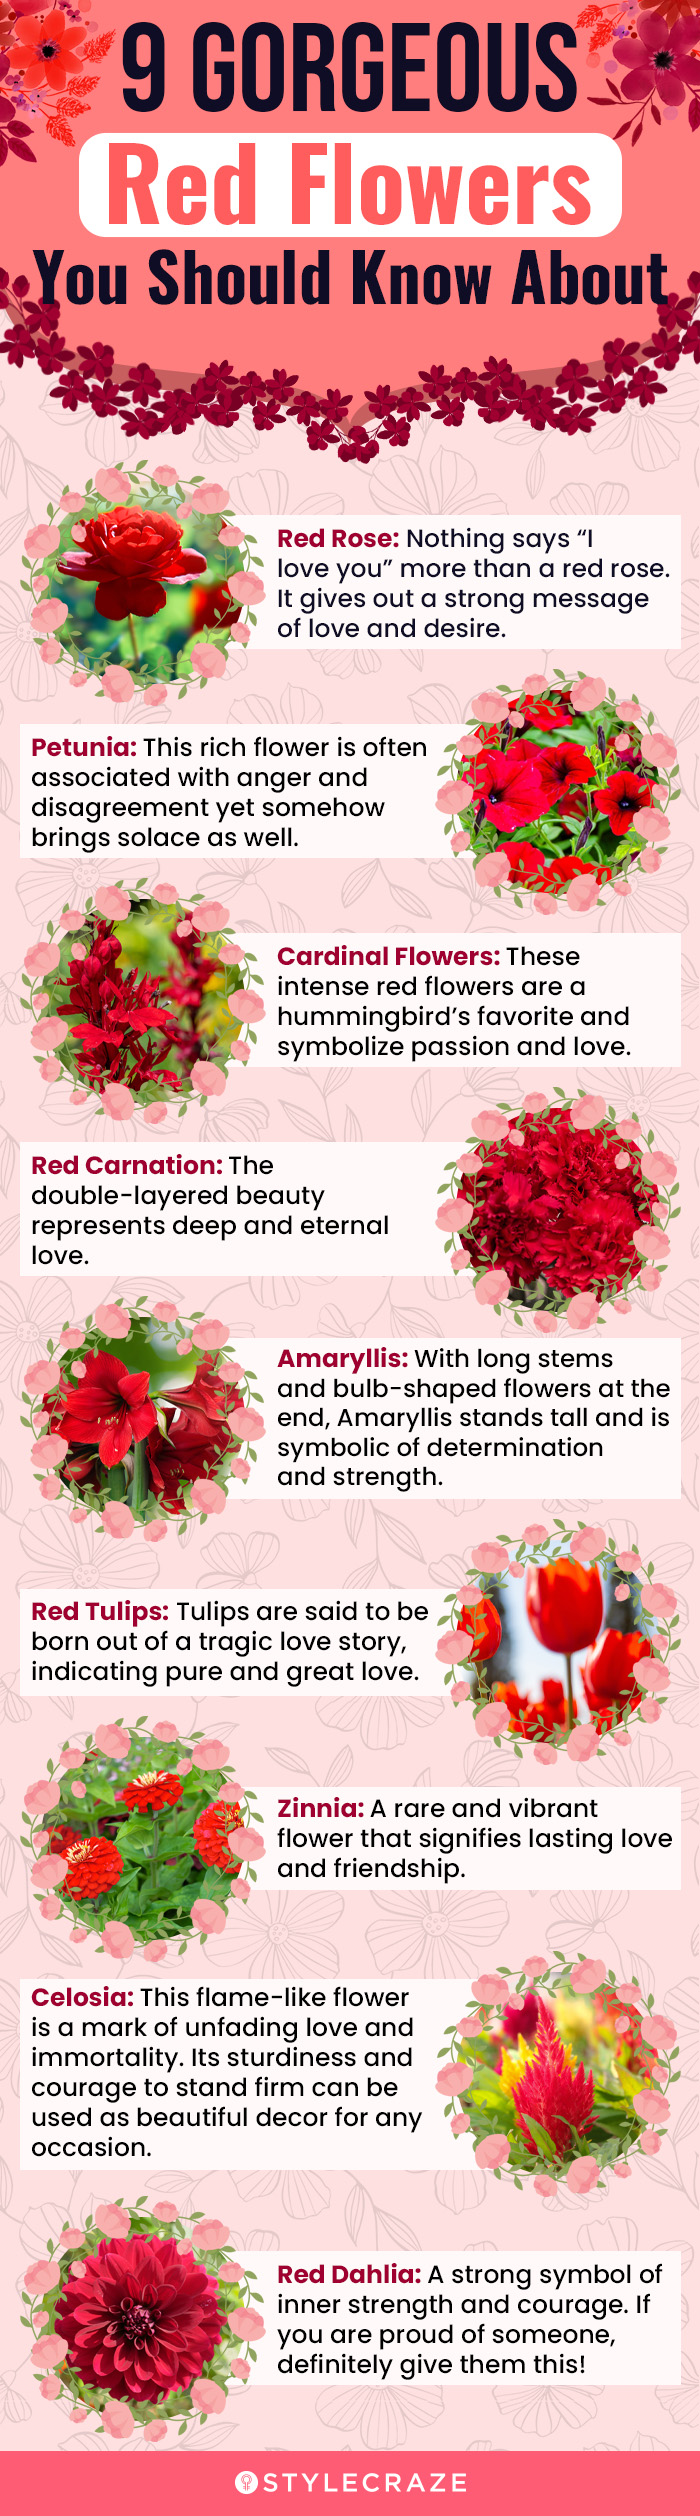 9 gorgeous red flowers you should know about(infographic)